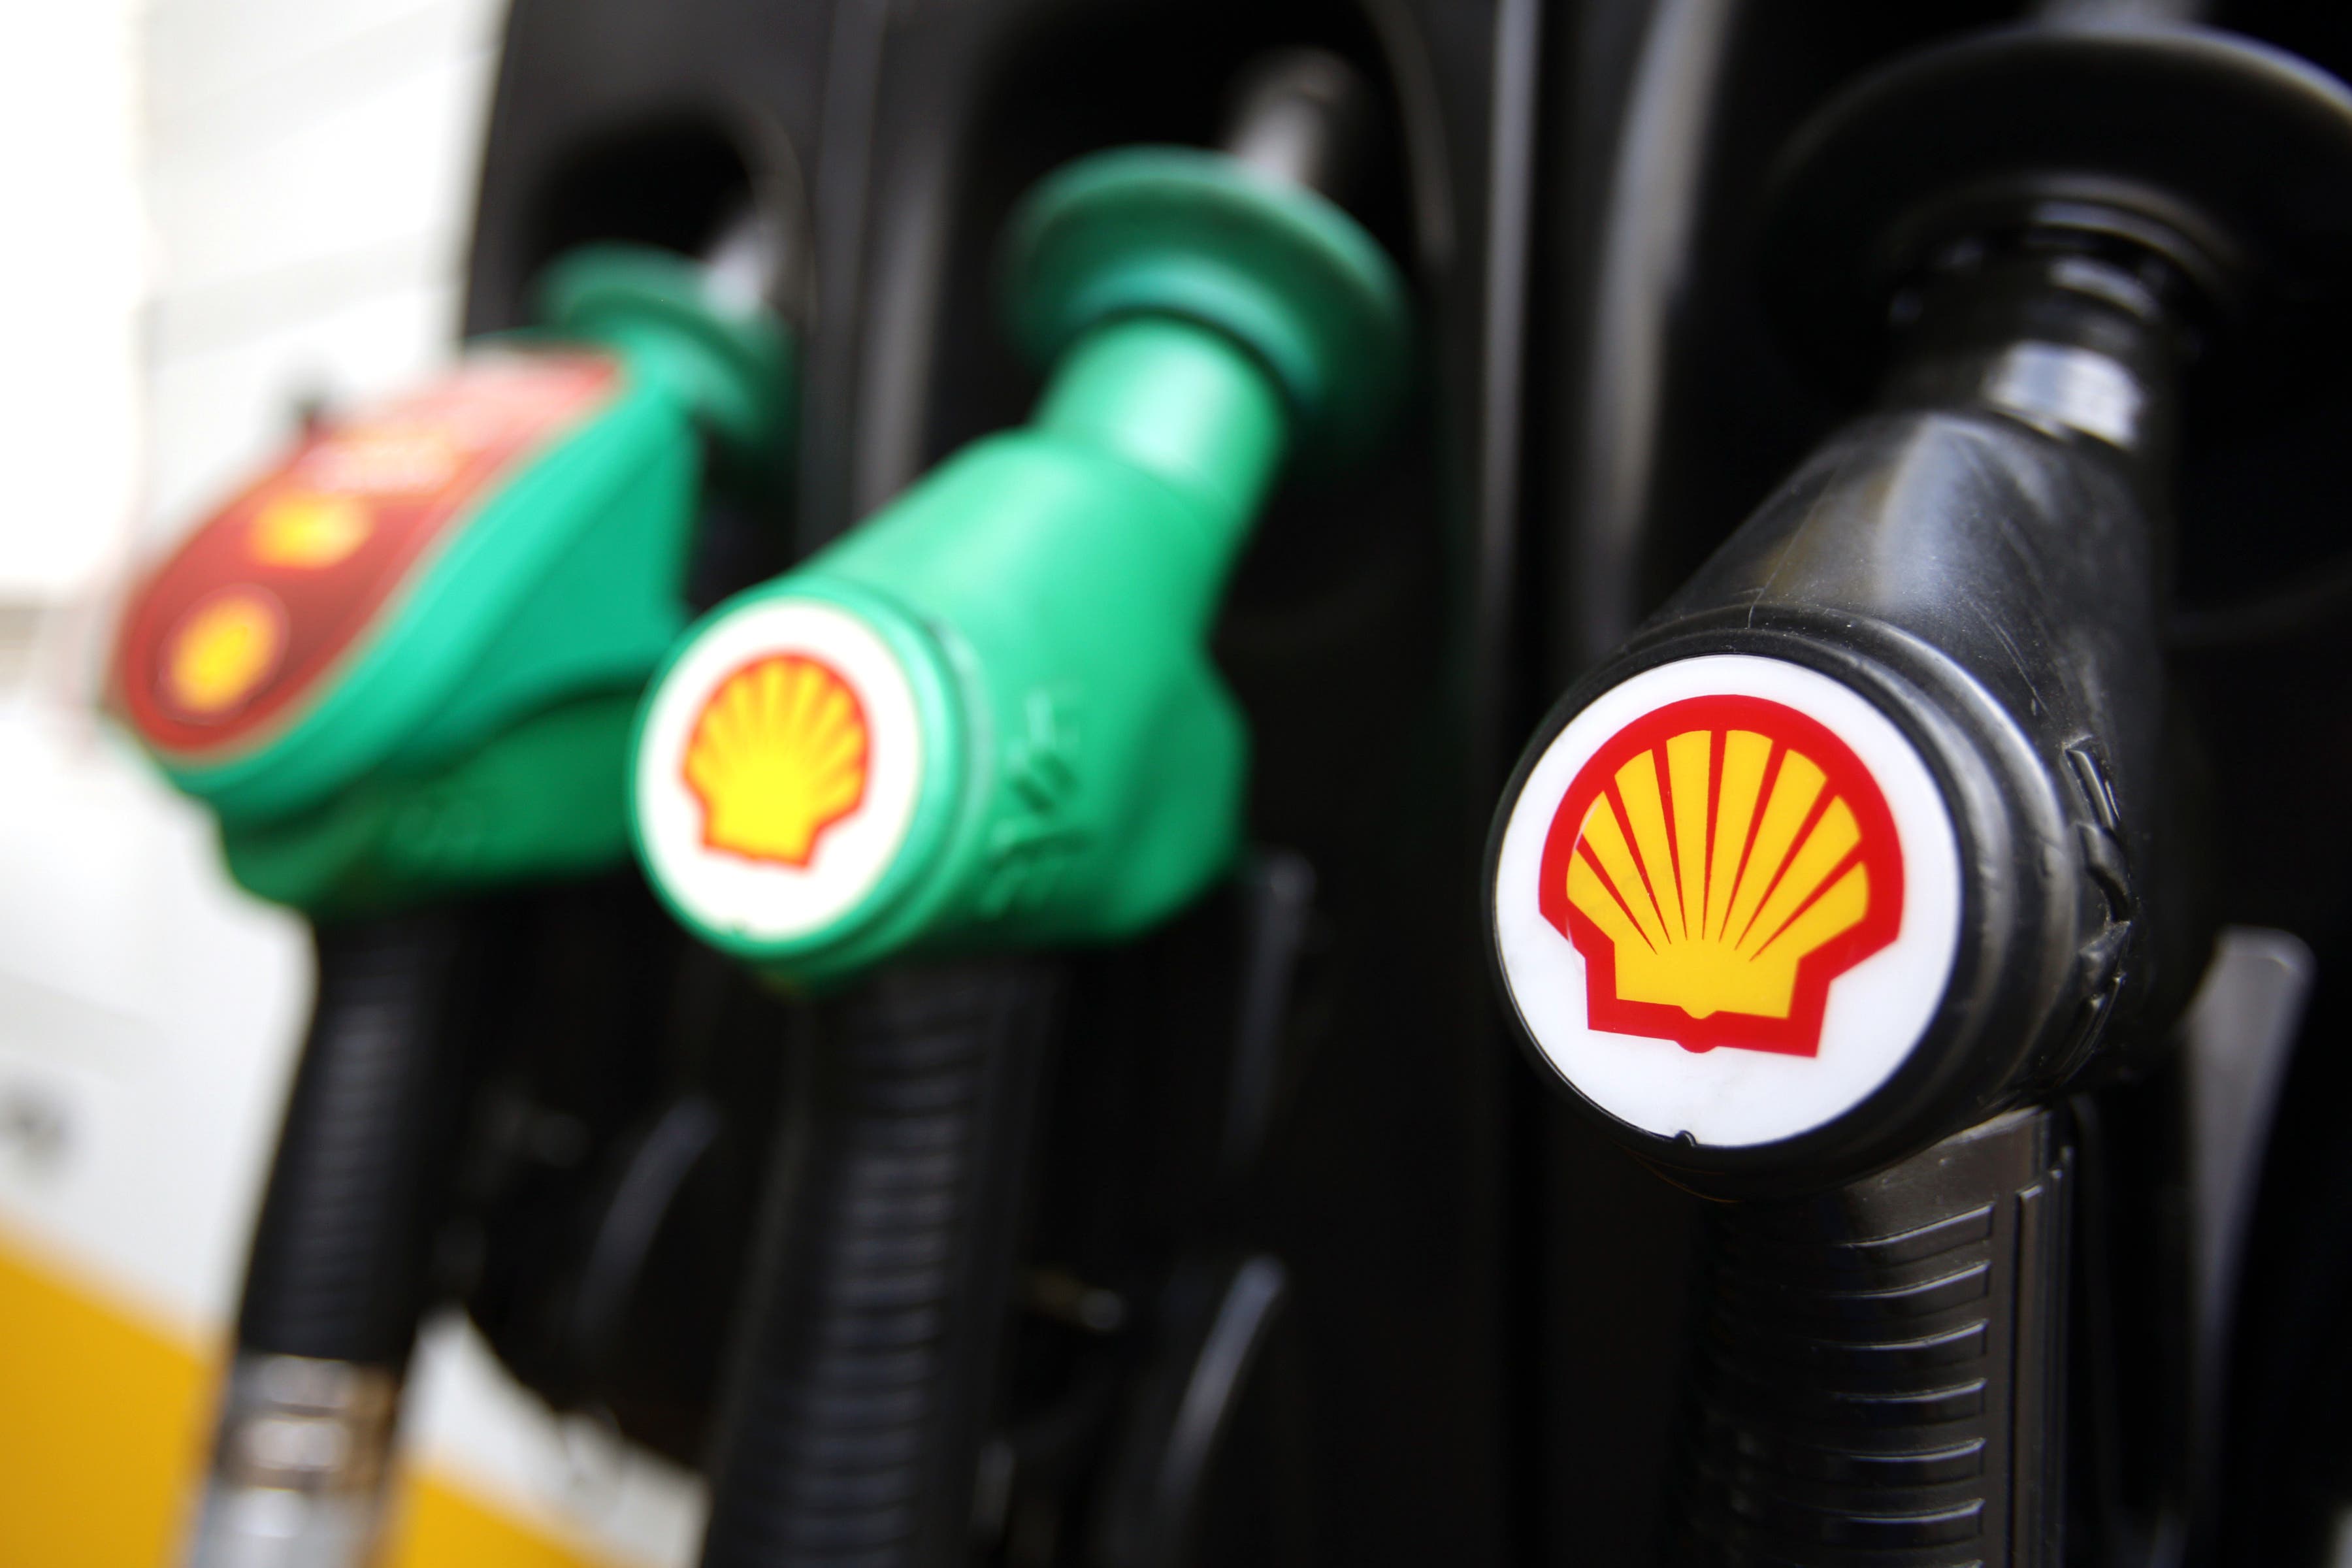 Shell has unveiled further returns for shareholders after better-than-expected earnings as the oil giant faces mounting investor pressure over its action to tackle climate change